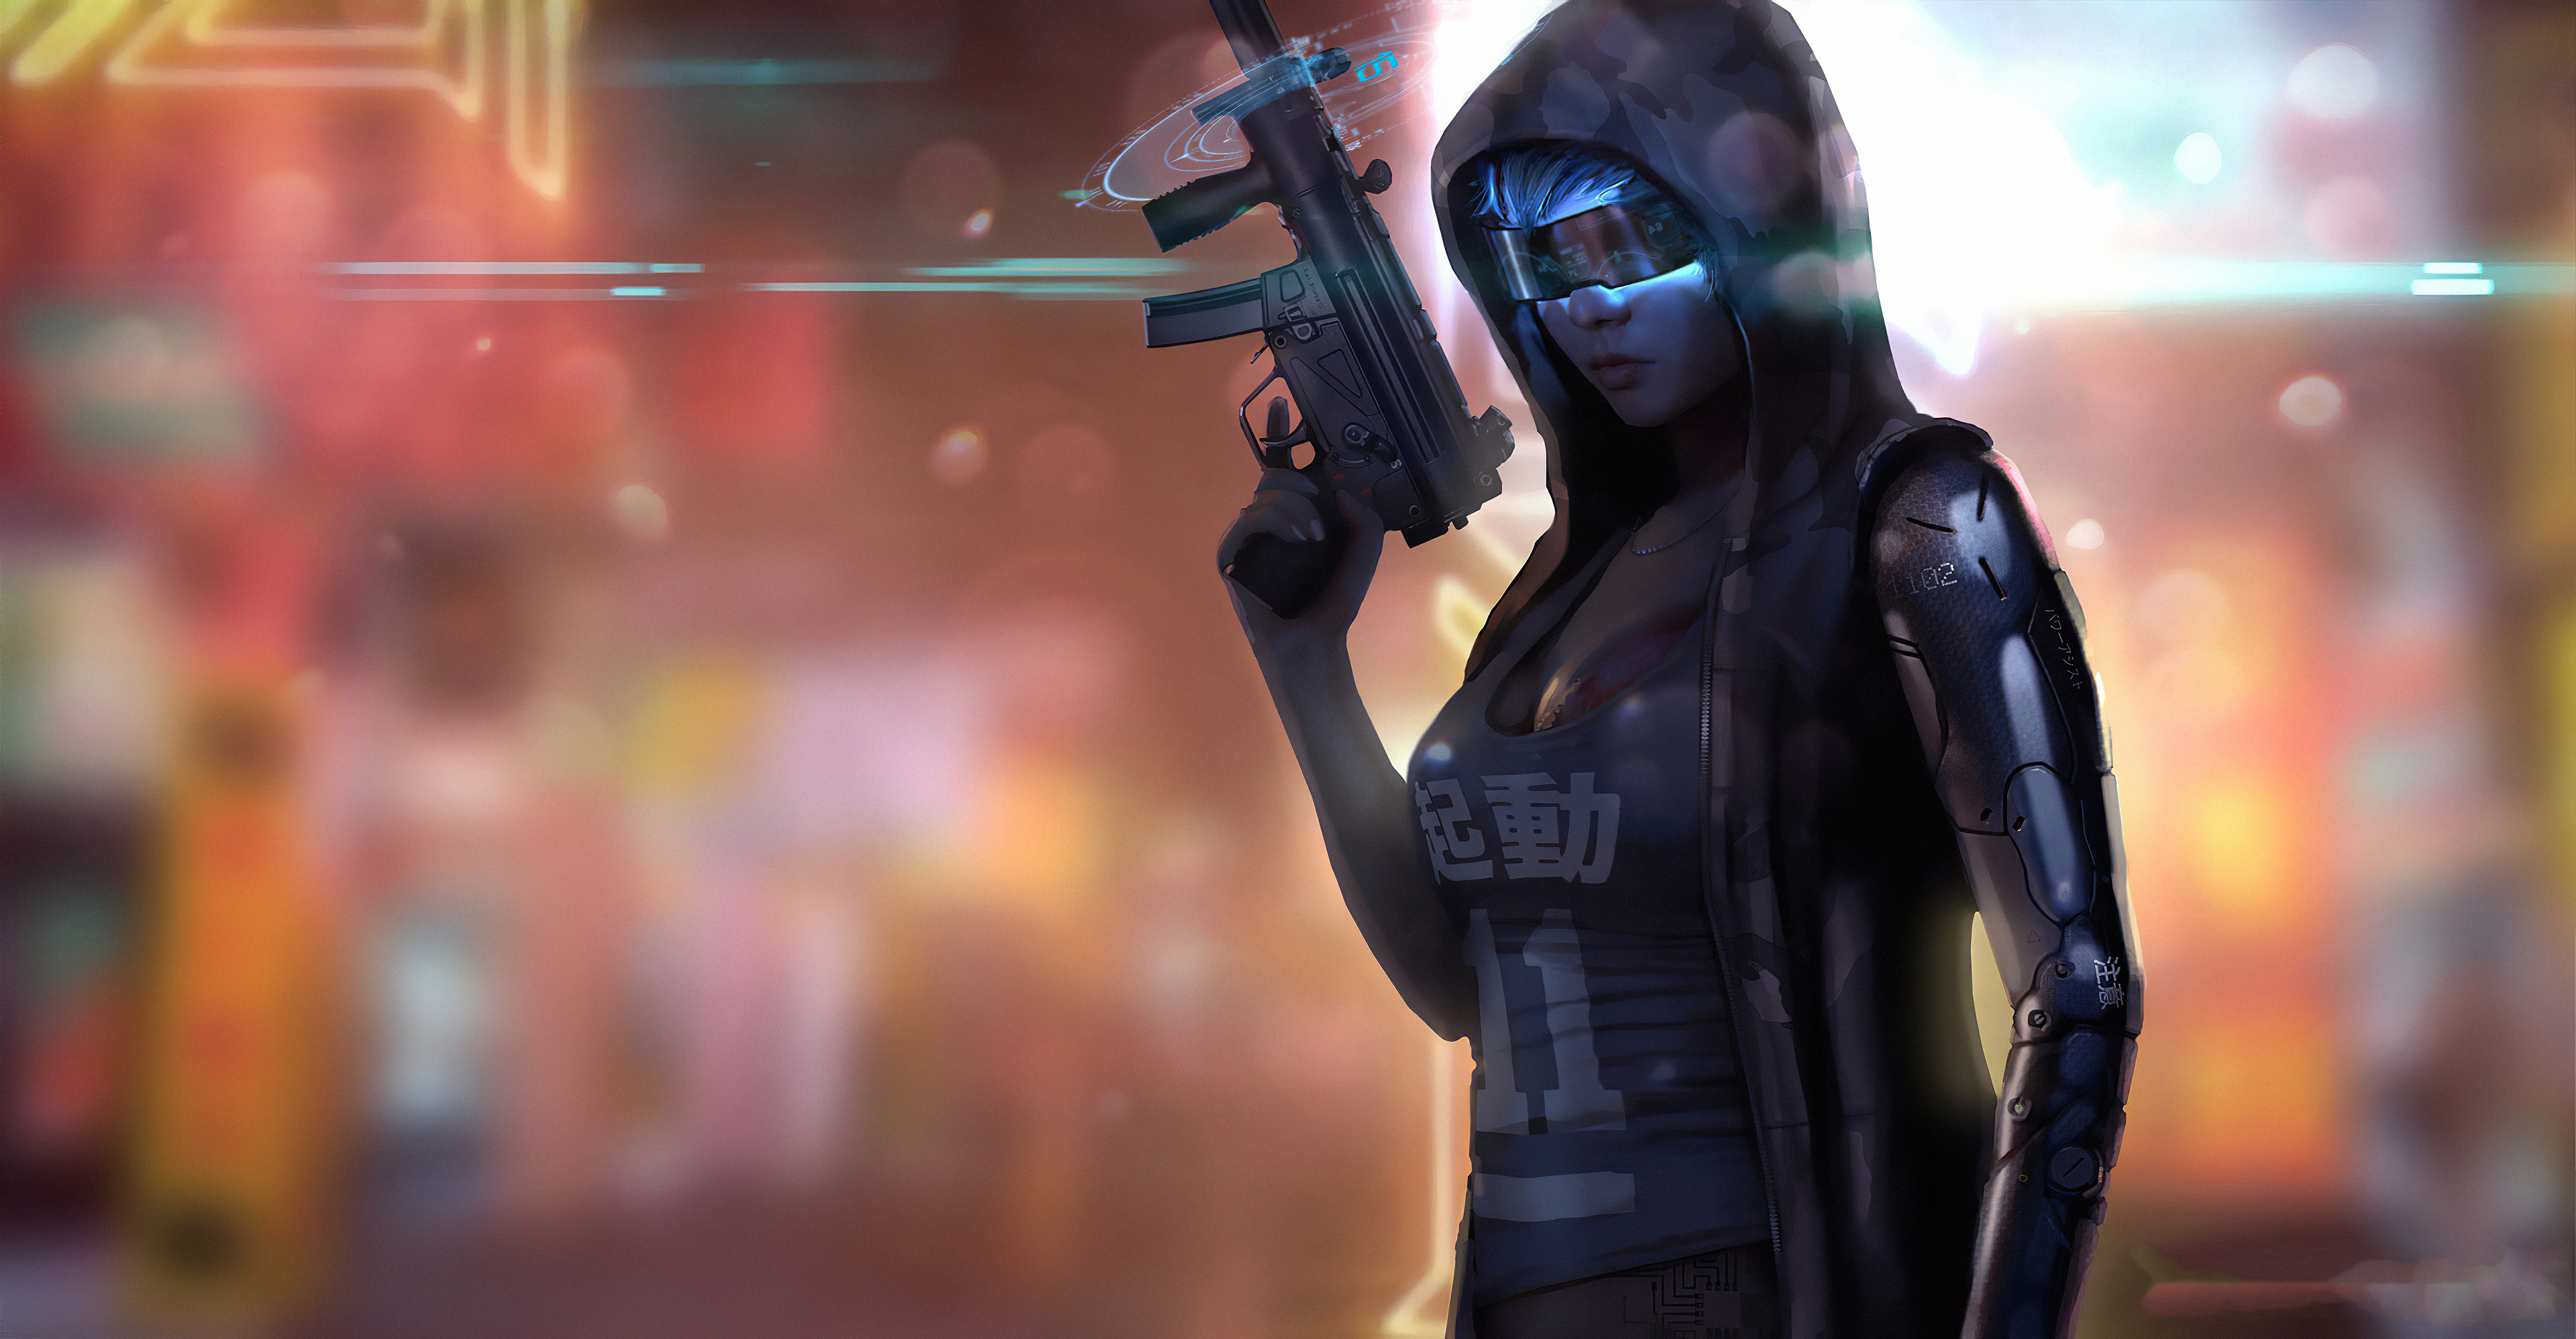 Cyberpunk Girl With Weapon Wallpapers